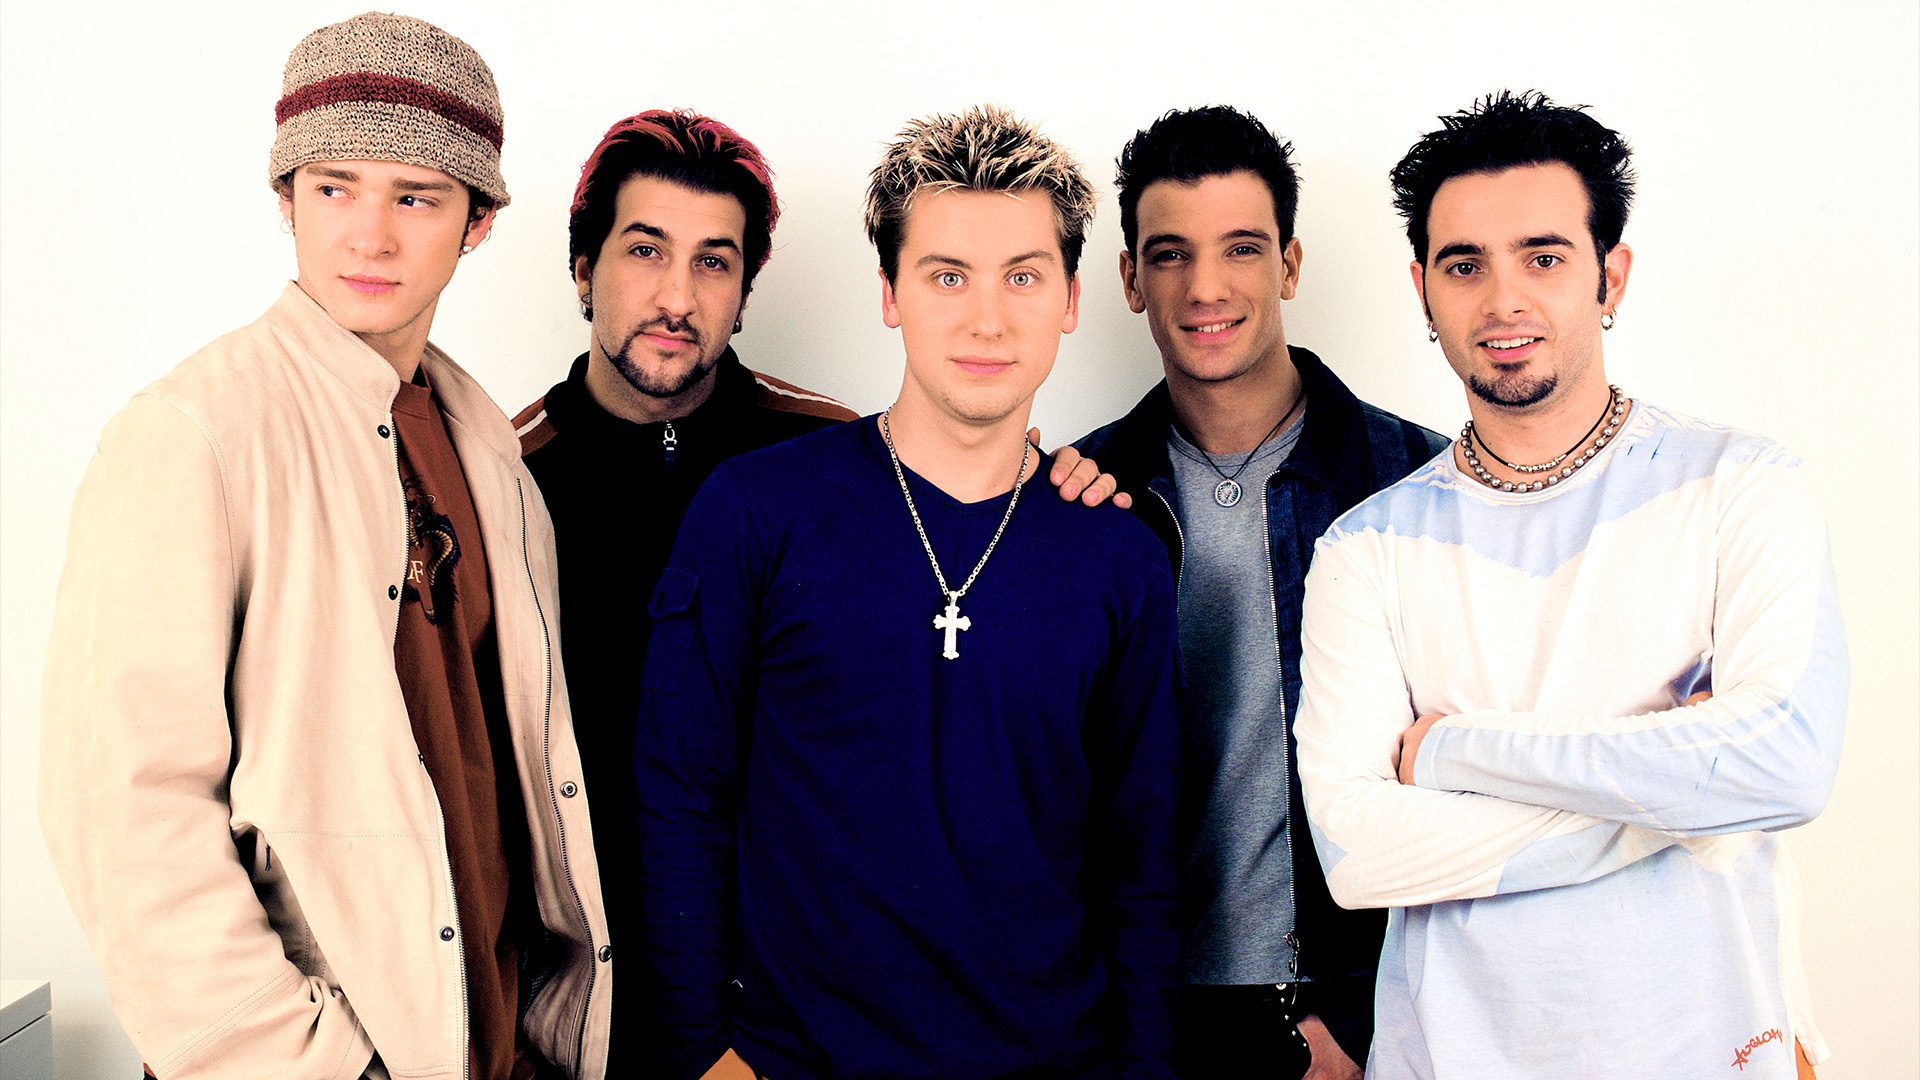 NSYNC's best hits, Exclusive sale, Irresistible offer, Music madness magazine promotion, 1920x1080 Full HD Desktop